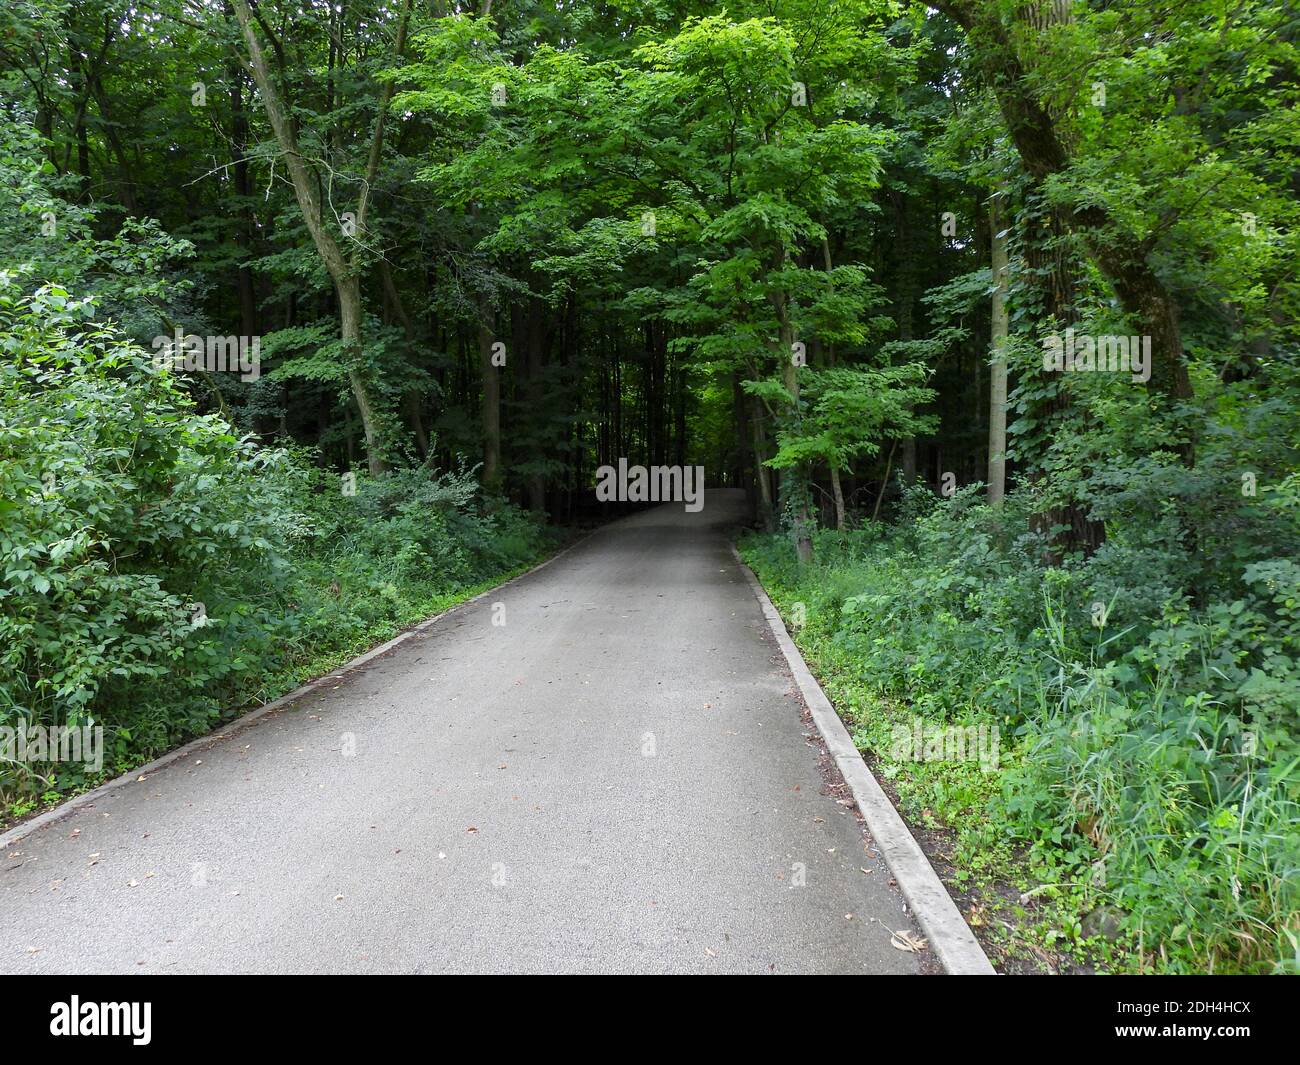 Stunning Bike and Hiking Trail Path into Vibrant Green Forest with Overhanging Branches and Leaves Stock Photo